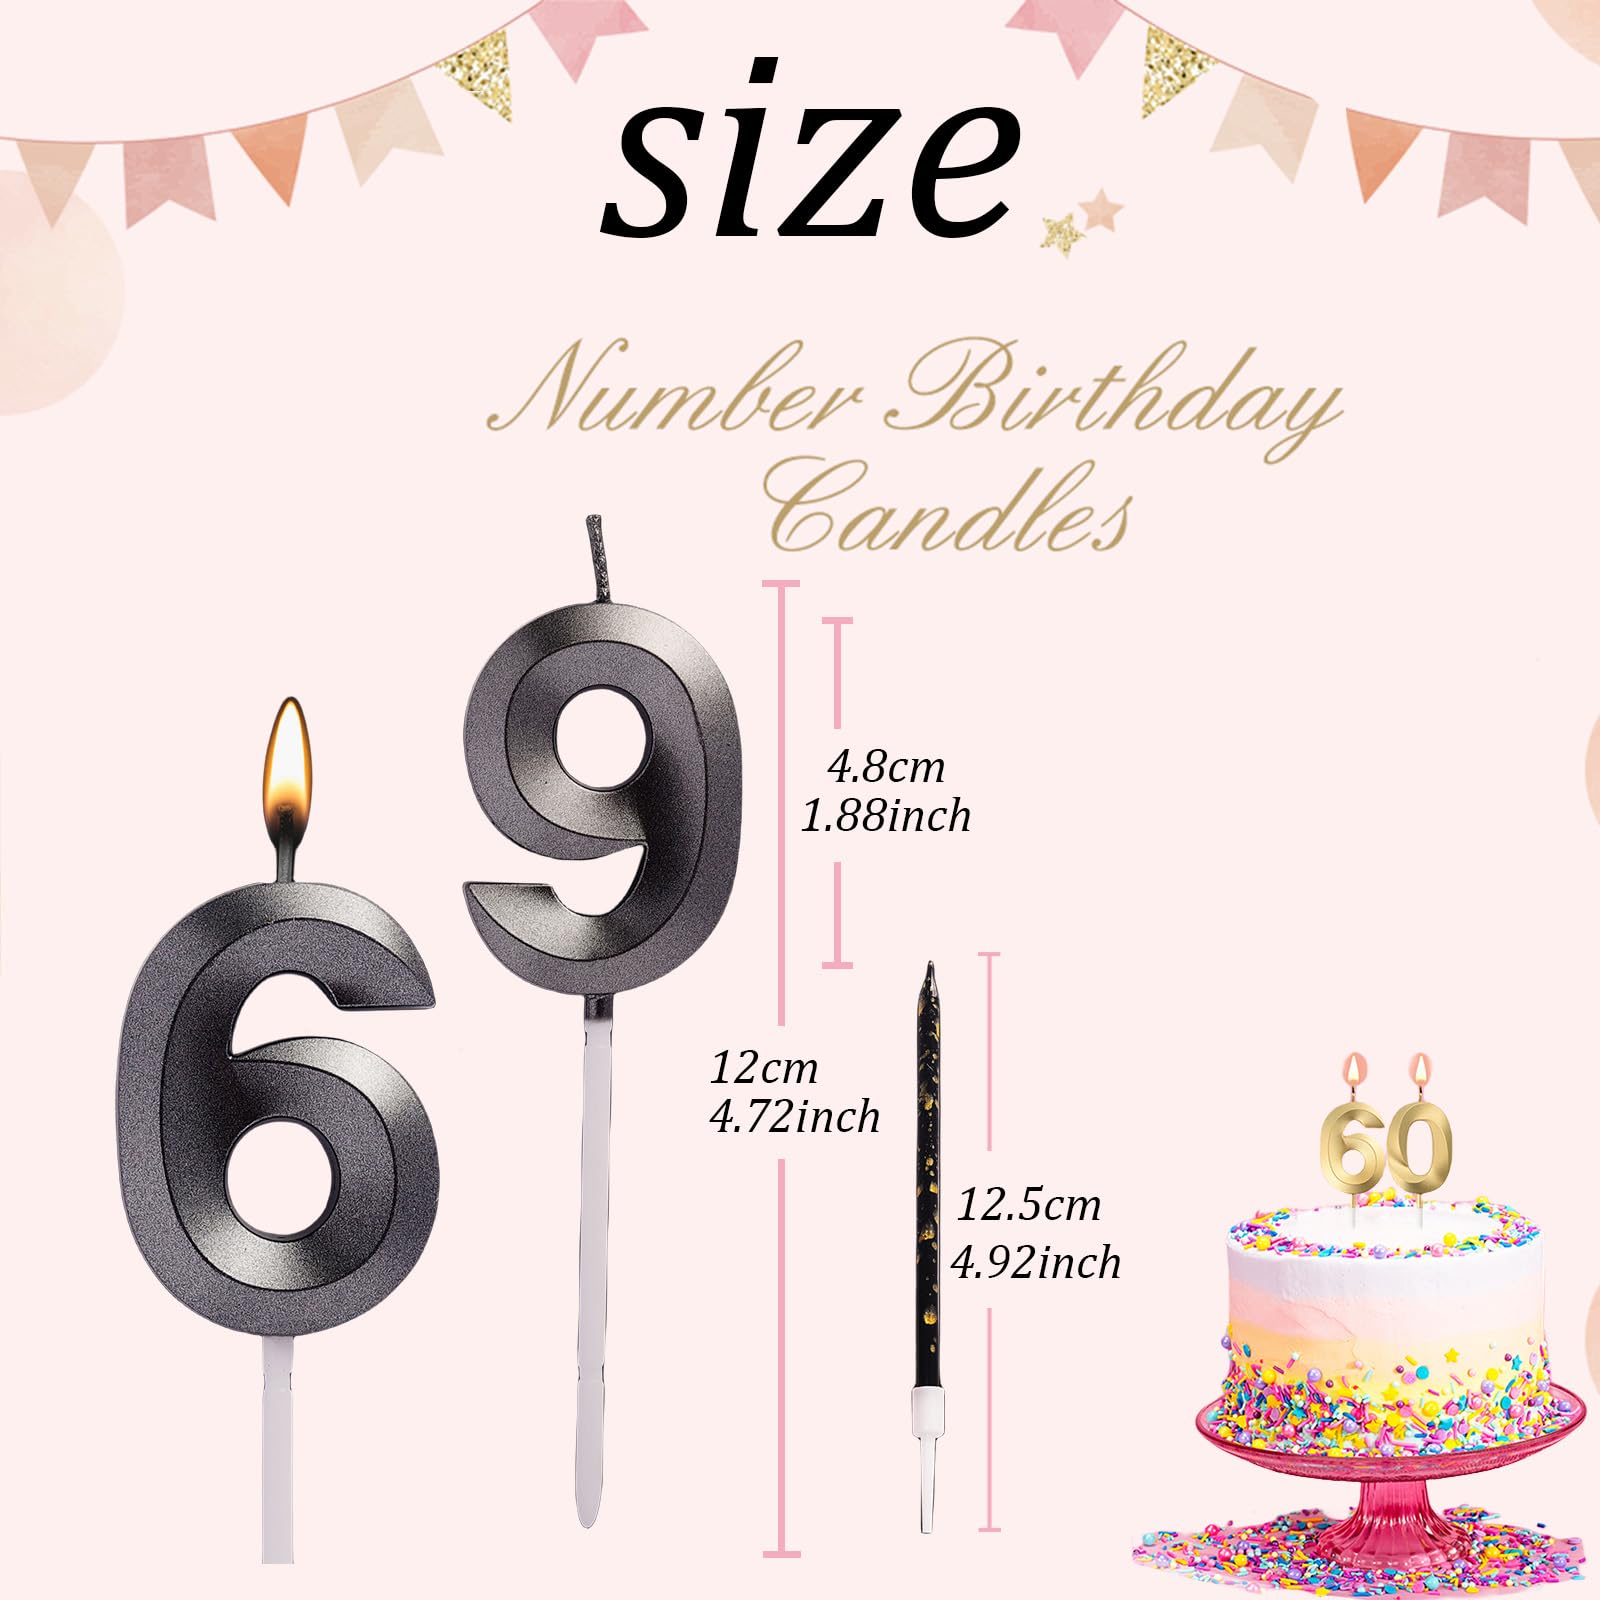 50th Birthday Candles Black Number 50 Candles for Birthday Cake with Black Long Candles, Black 50 Candles for Cake Birthday Cake Topper Decorations for Women Men Birthday Party